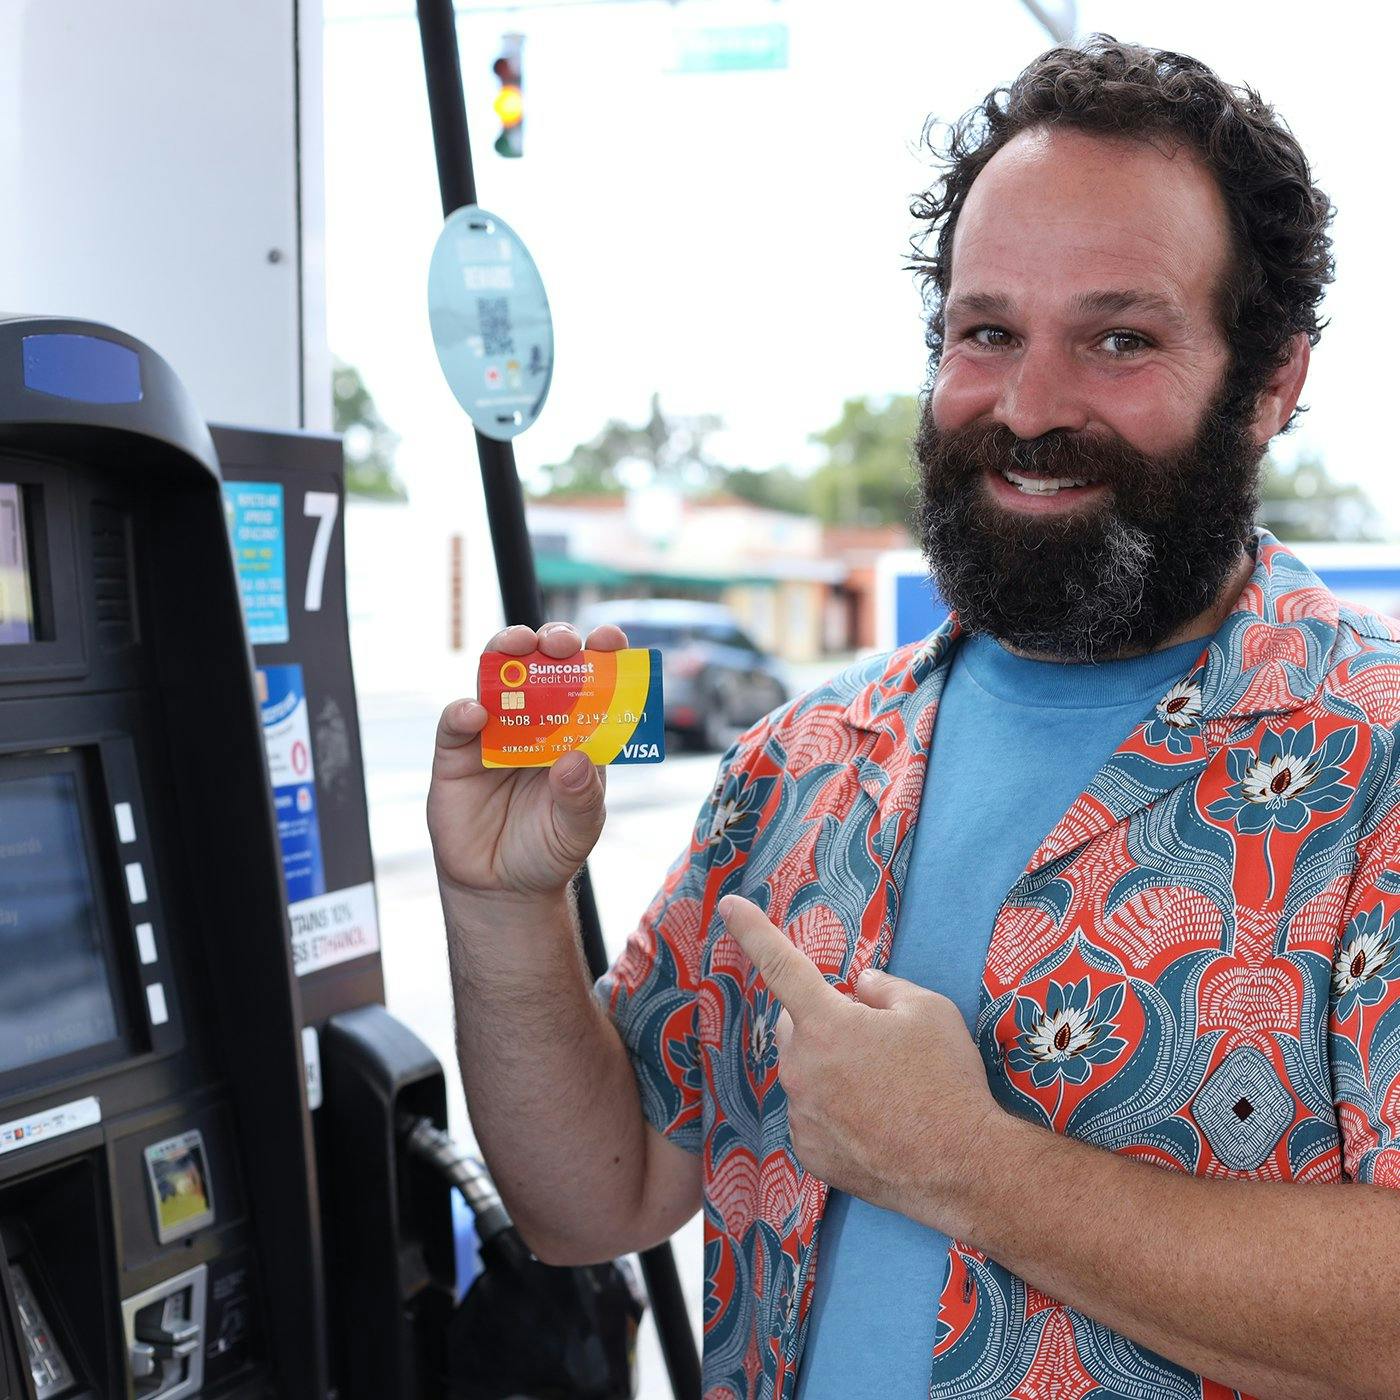 A smiling man holding a Suncoast credit card at a gas station